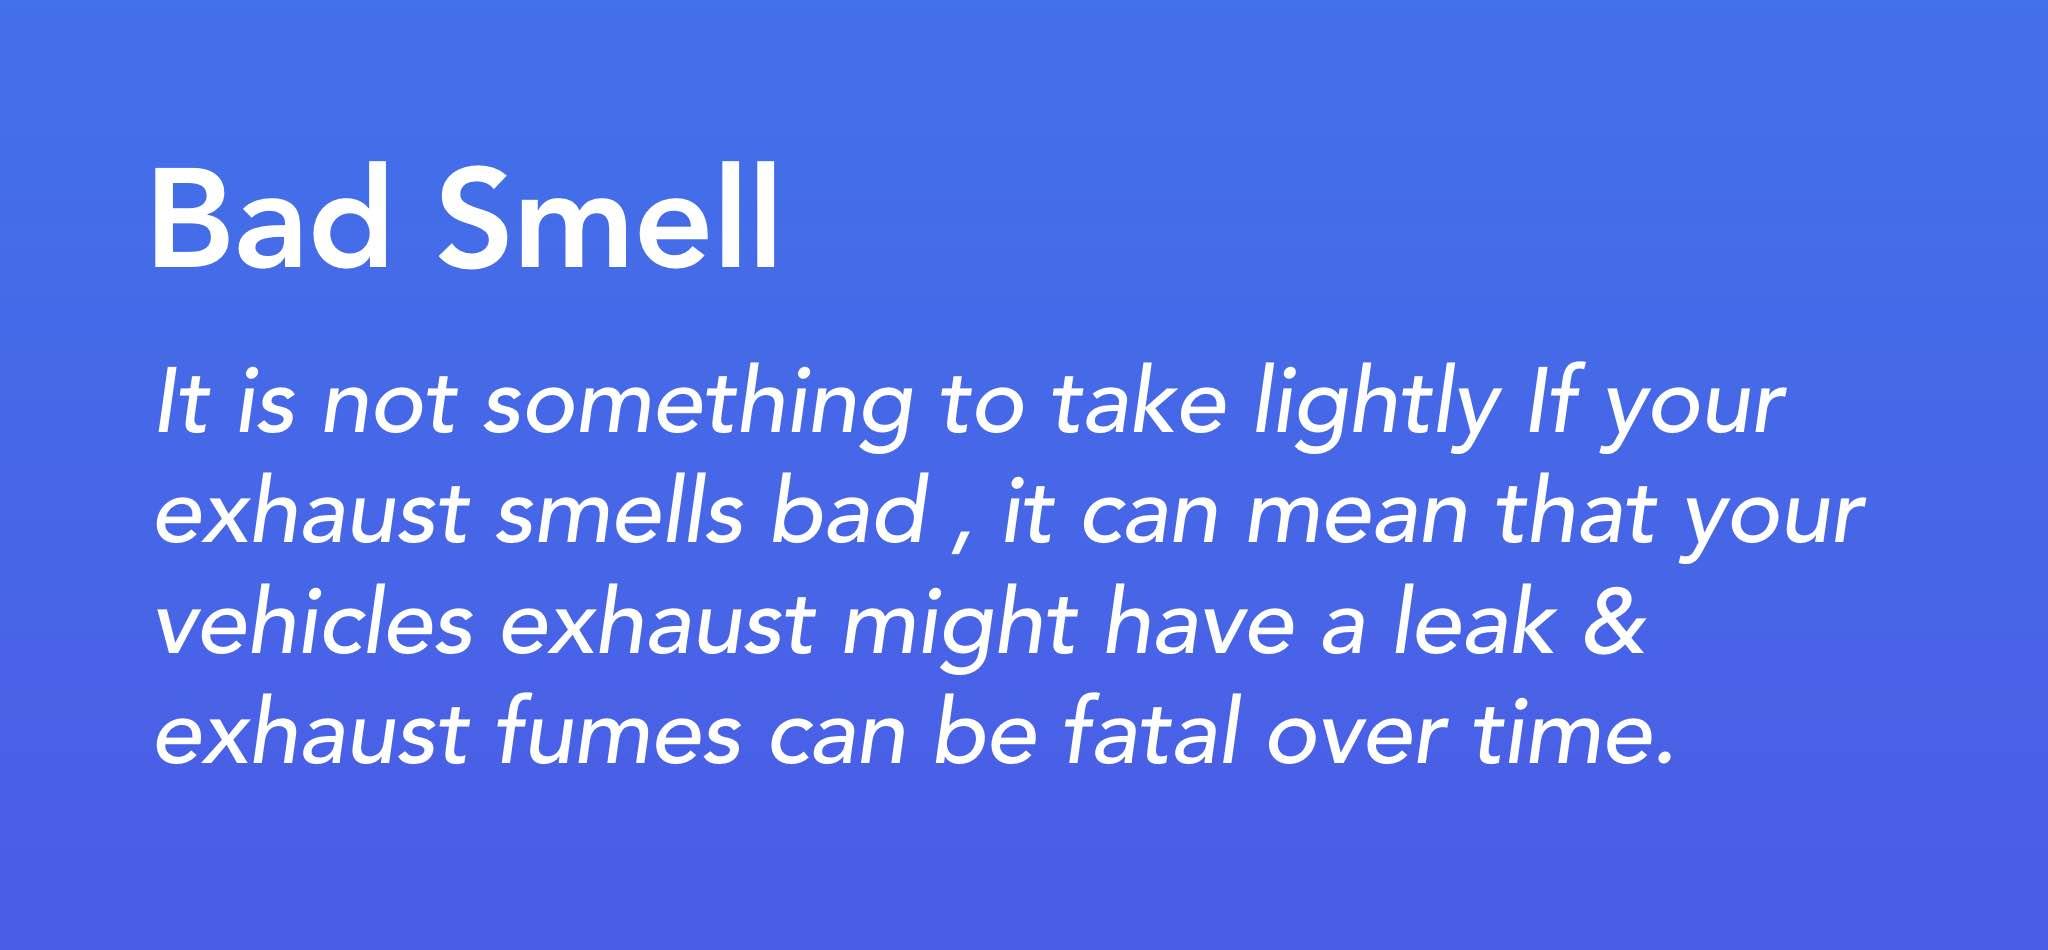 It is not something to take lightly if your exhaust smells bad, it can mean that your vehicle's exhaust might have a leak & exhaust fumes can be fatal over time.